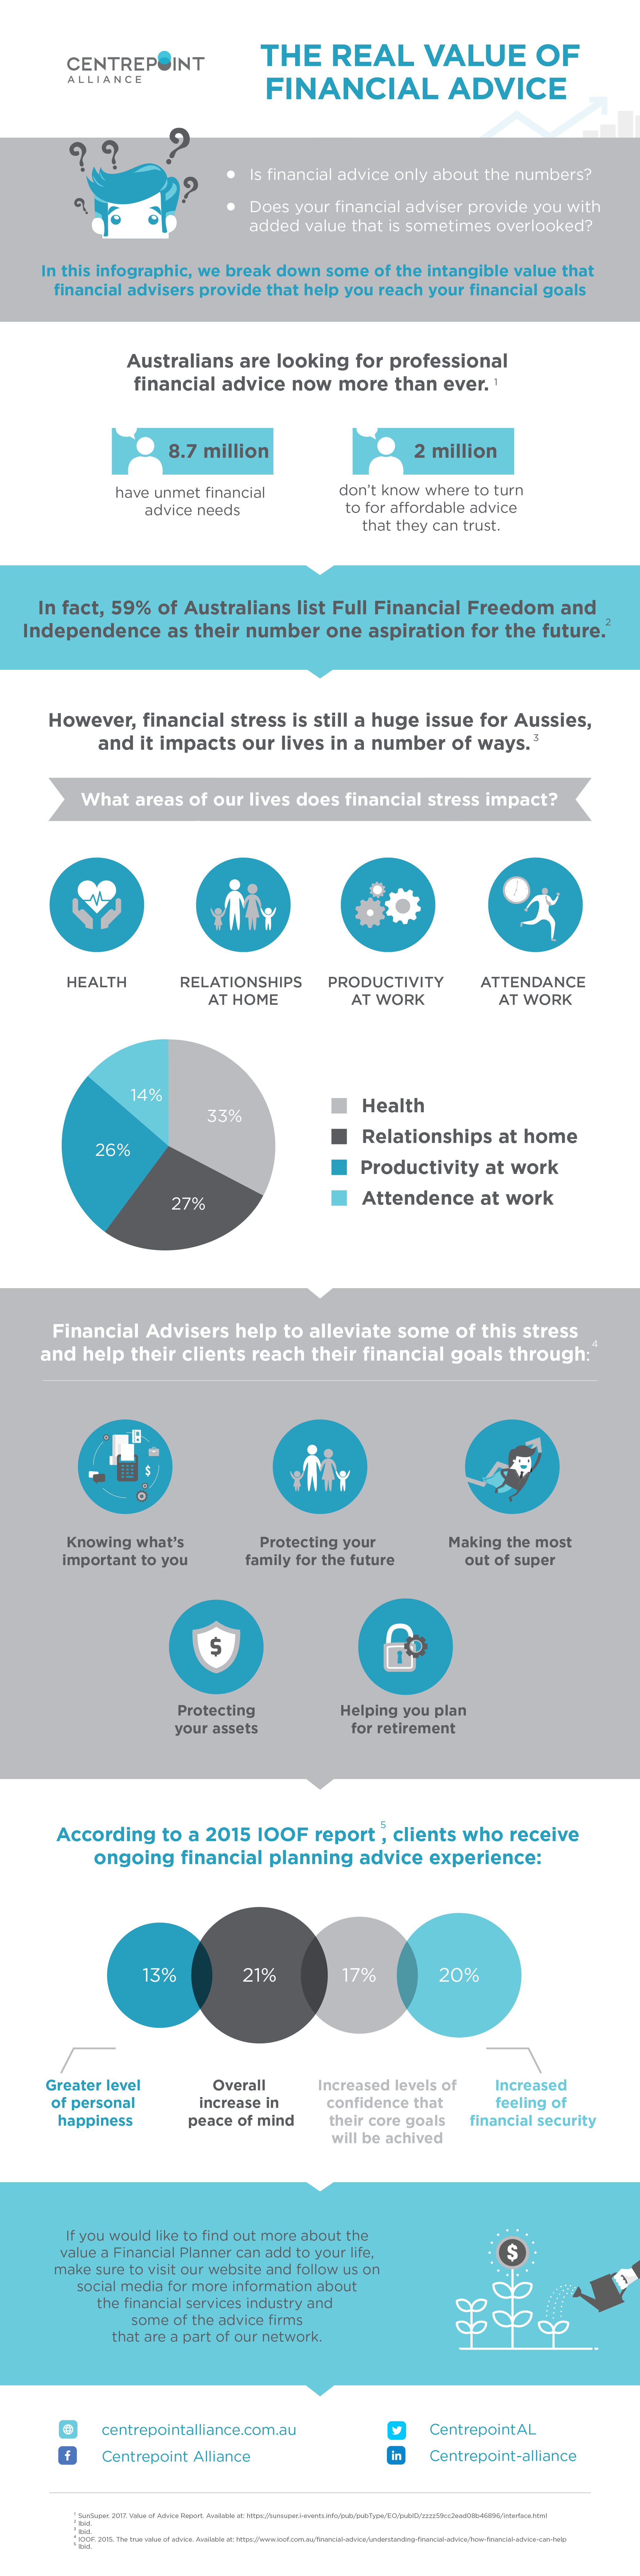 Infographic - The Real Value of Financial Advice